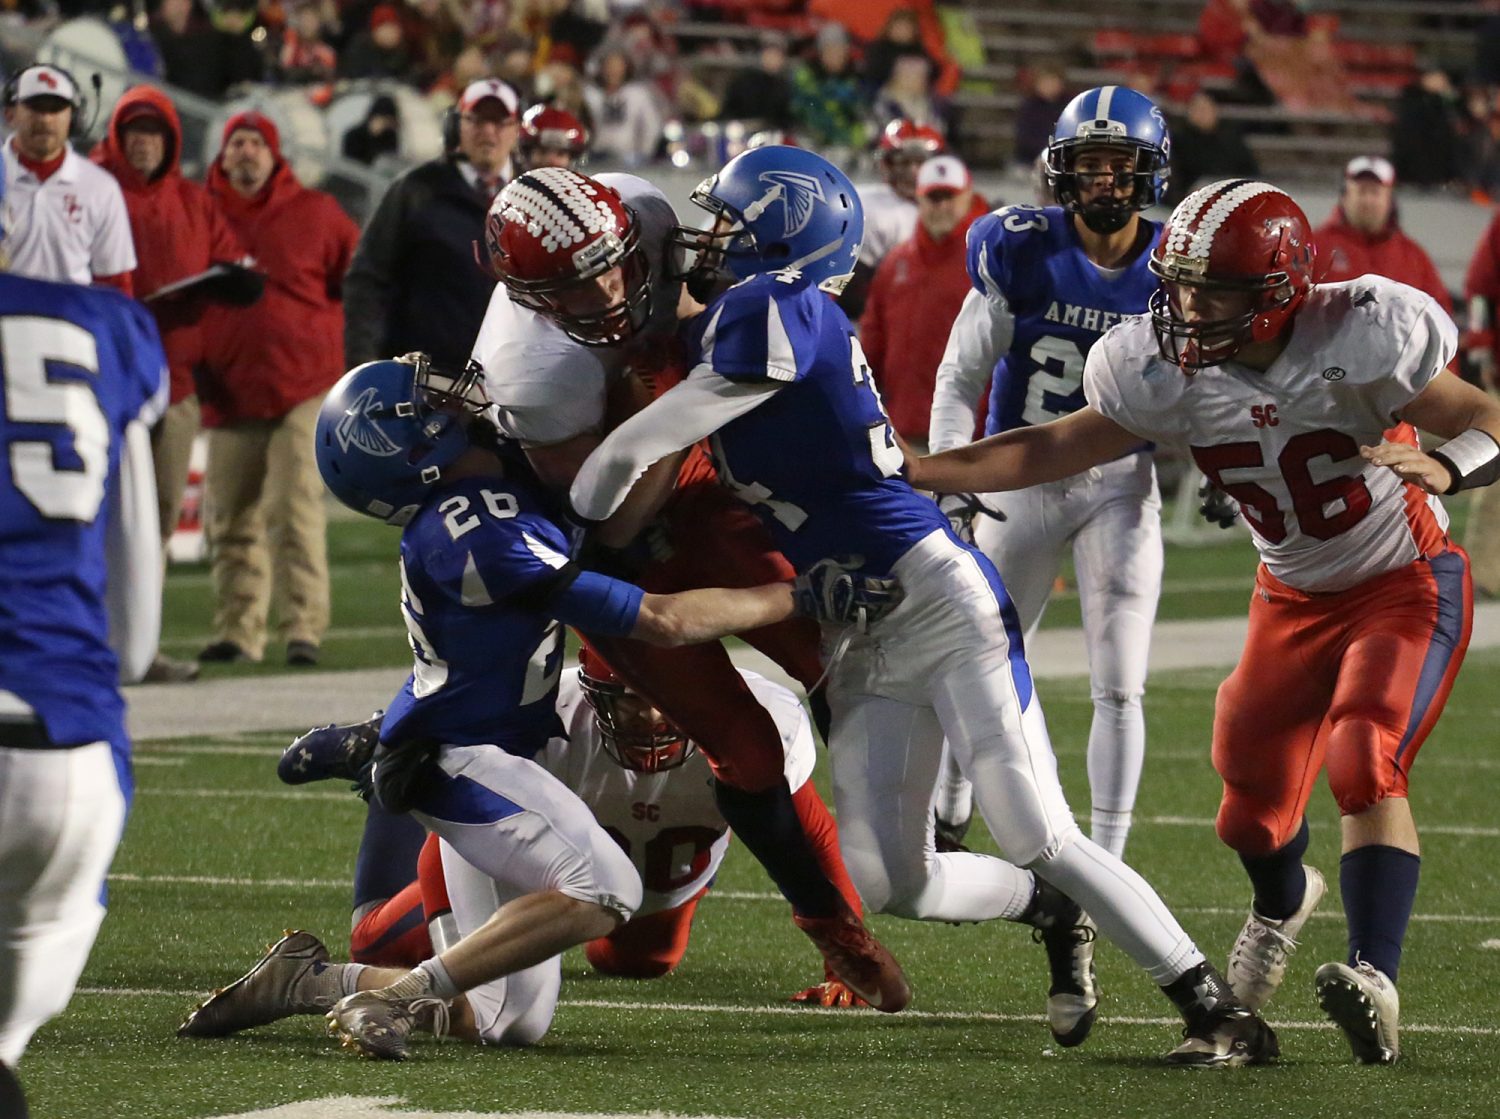 Spencer/Columbus' Hunter Hildebrandt is sandwiched between two Amherst defenders after catching a pass on a 3rd-and-goal play late in the first half as the Rockets lost to Amherst 42-0 in the WIAA Division 5 State Championship Game at Camp Randall Stadium in Madison, Thursday, Nov. 19, 2015.